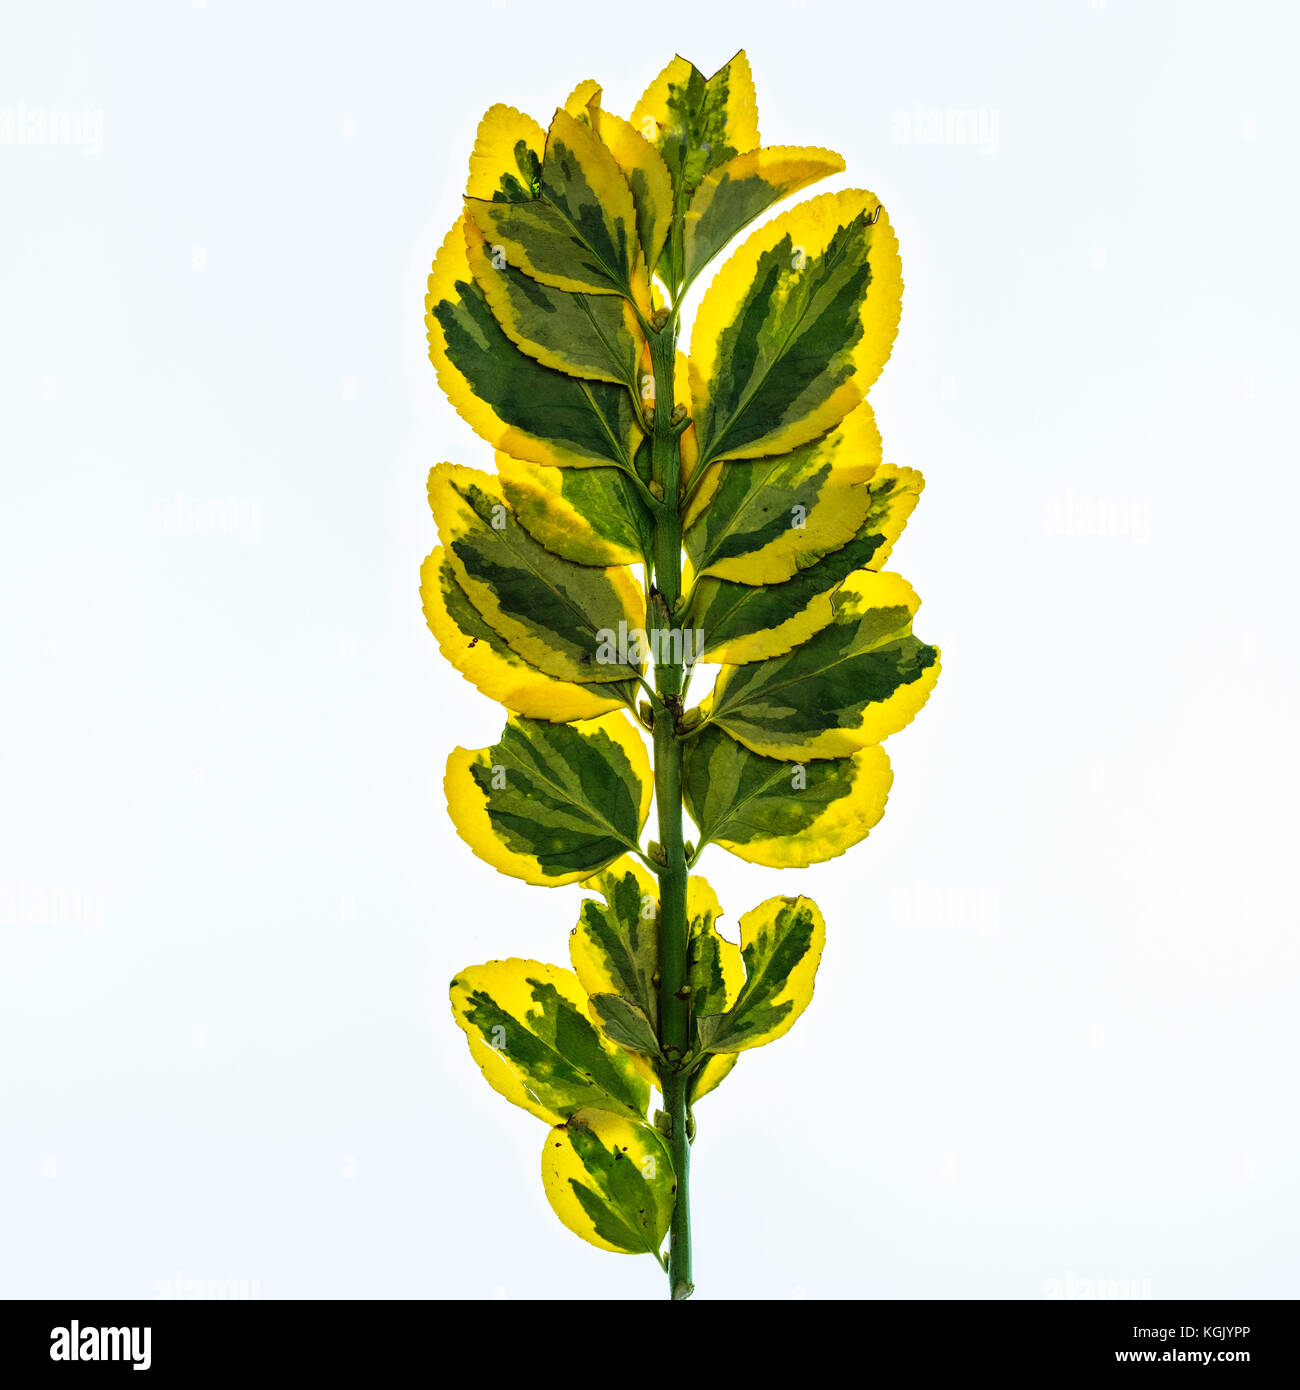 A pressed branch of Euonymus japonicus, an evergreen shrub, against a white background. Oklahoma, USA. Stock Photo